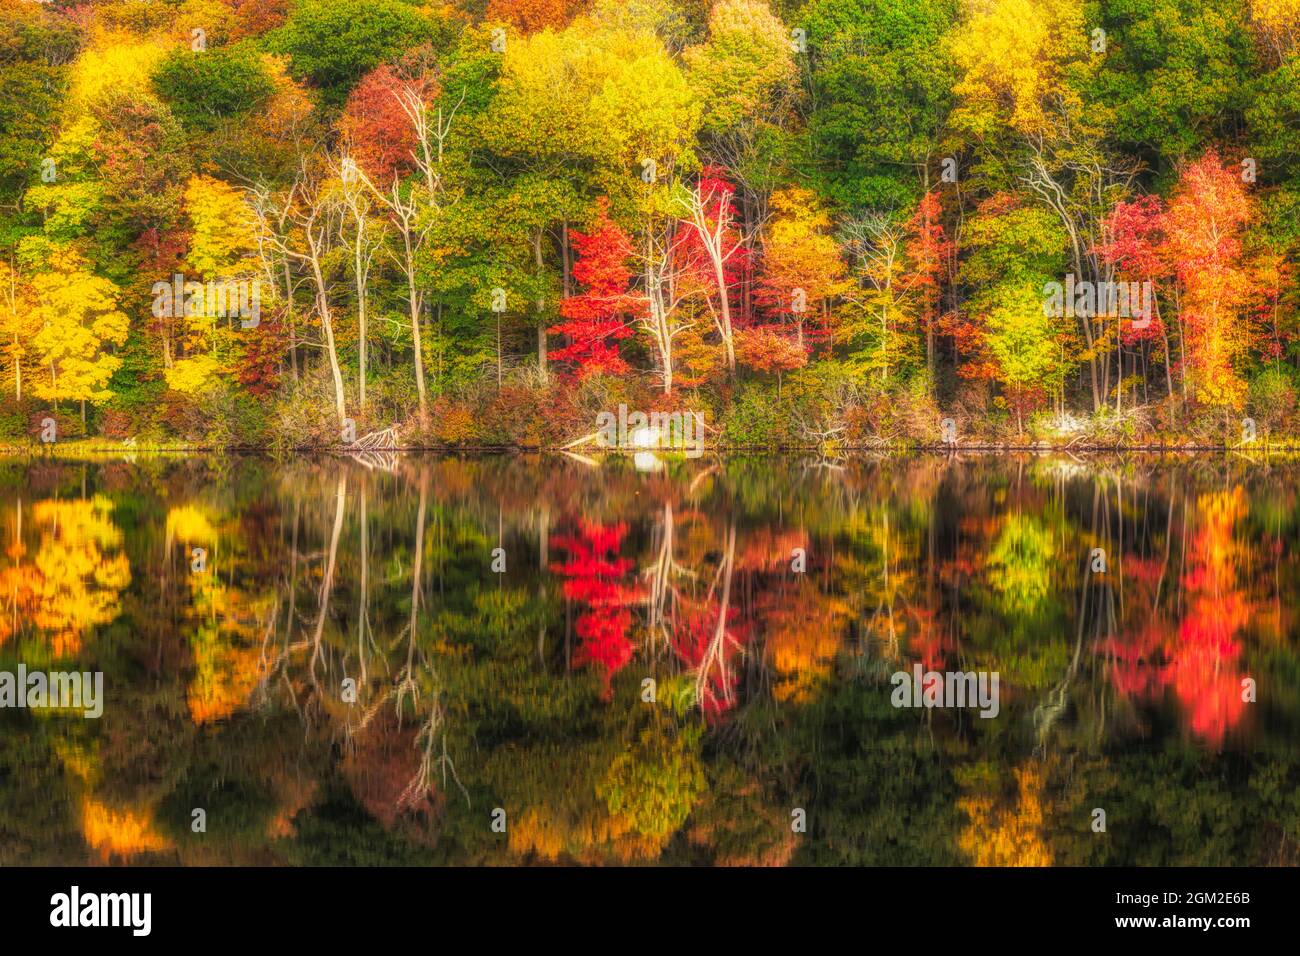 Natures Fall Color Palette  - View to the magnificent colors of fall foliage and reflections on the calm waters on Lake Skannatat at Harriman State Pa Stock Photo